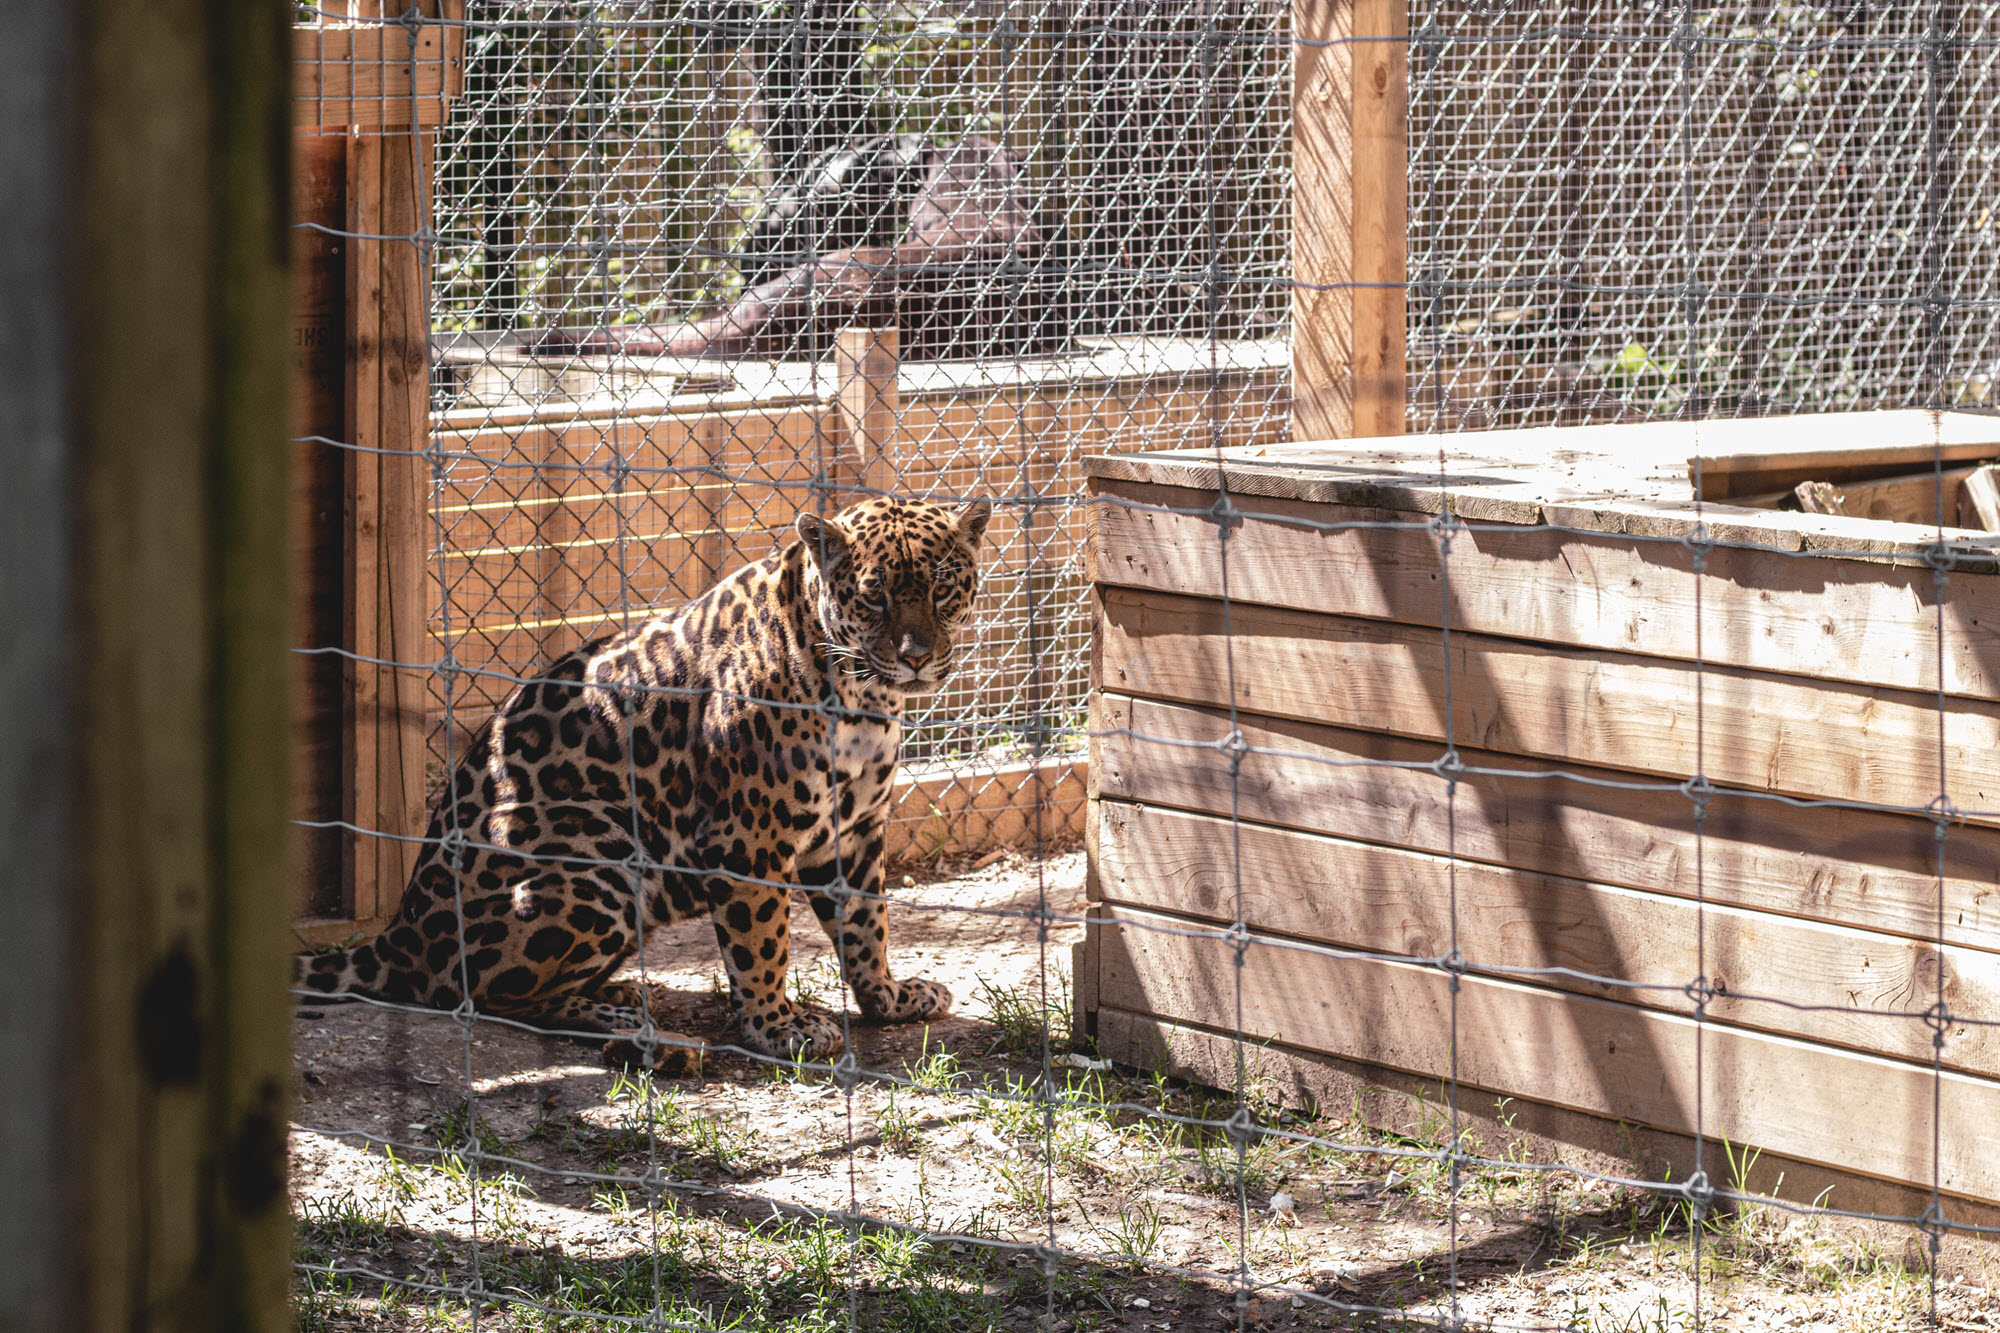 Image shows leopard in cage at Killman Zoo.